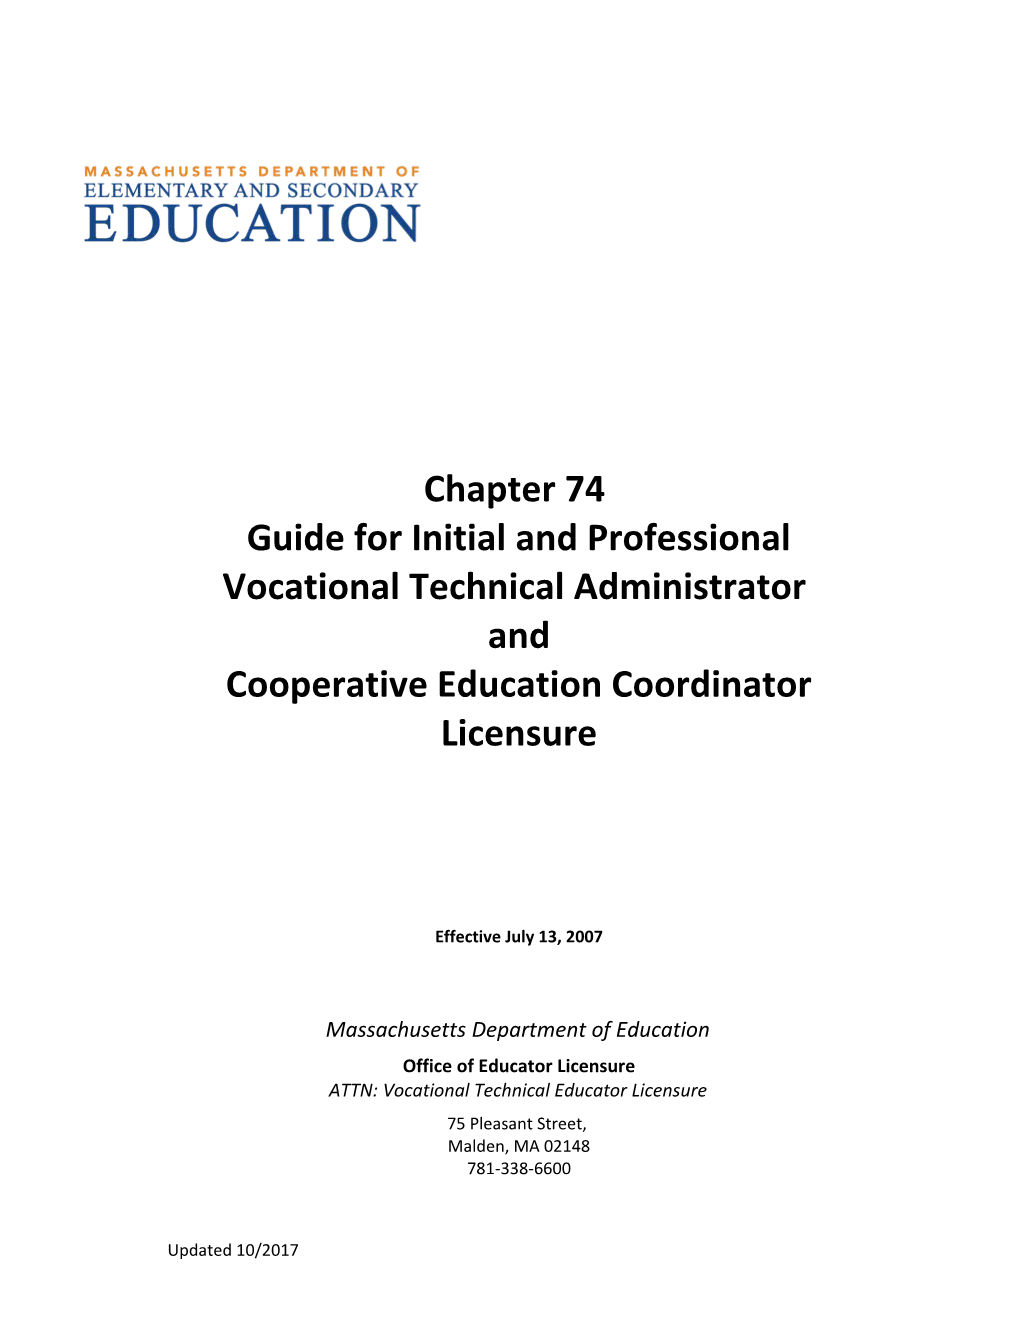 Chapter 74 Guide for Vocational Technical Administrator and Cooperative Education Coordinator